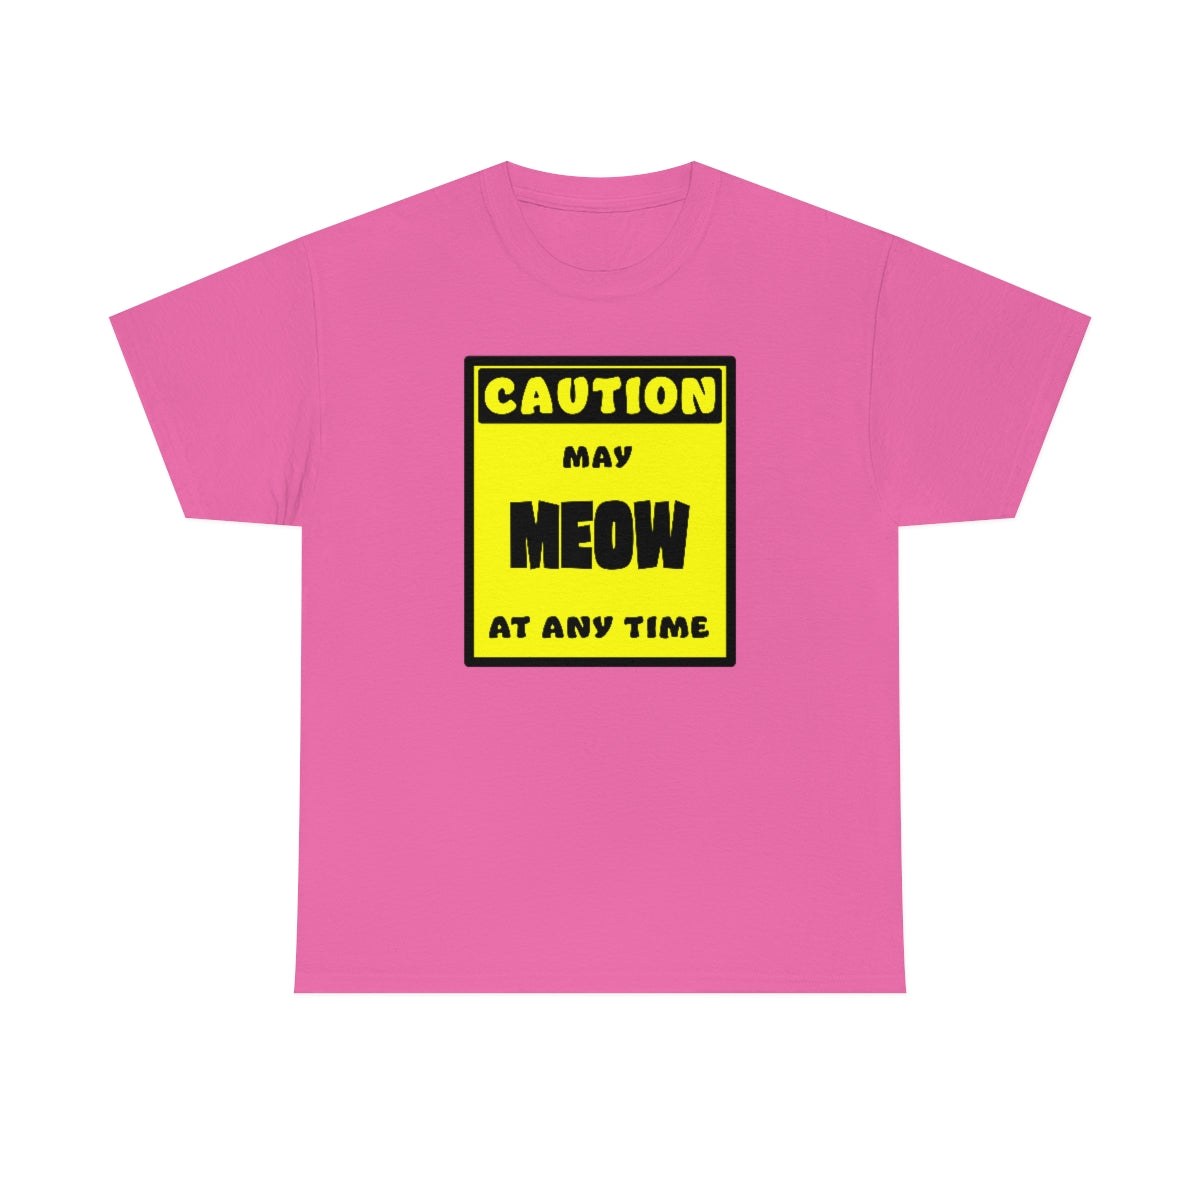 CAUTION! May MEOW at any time! - T-Shirt T-Shirt AFLT-Whootorca Pink S 